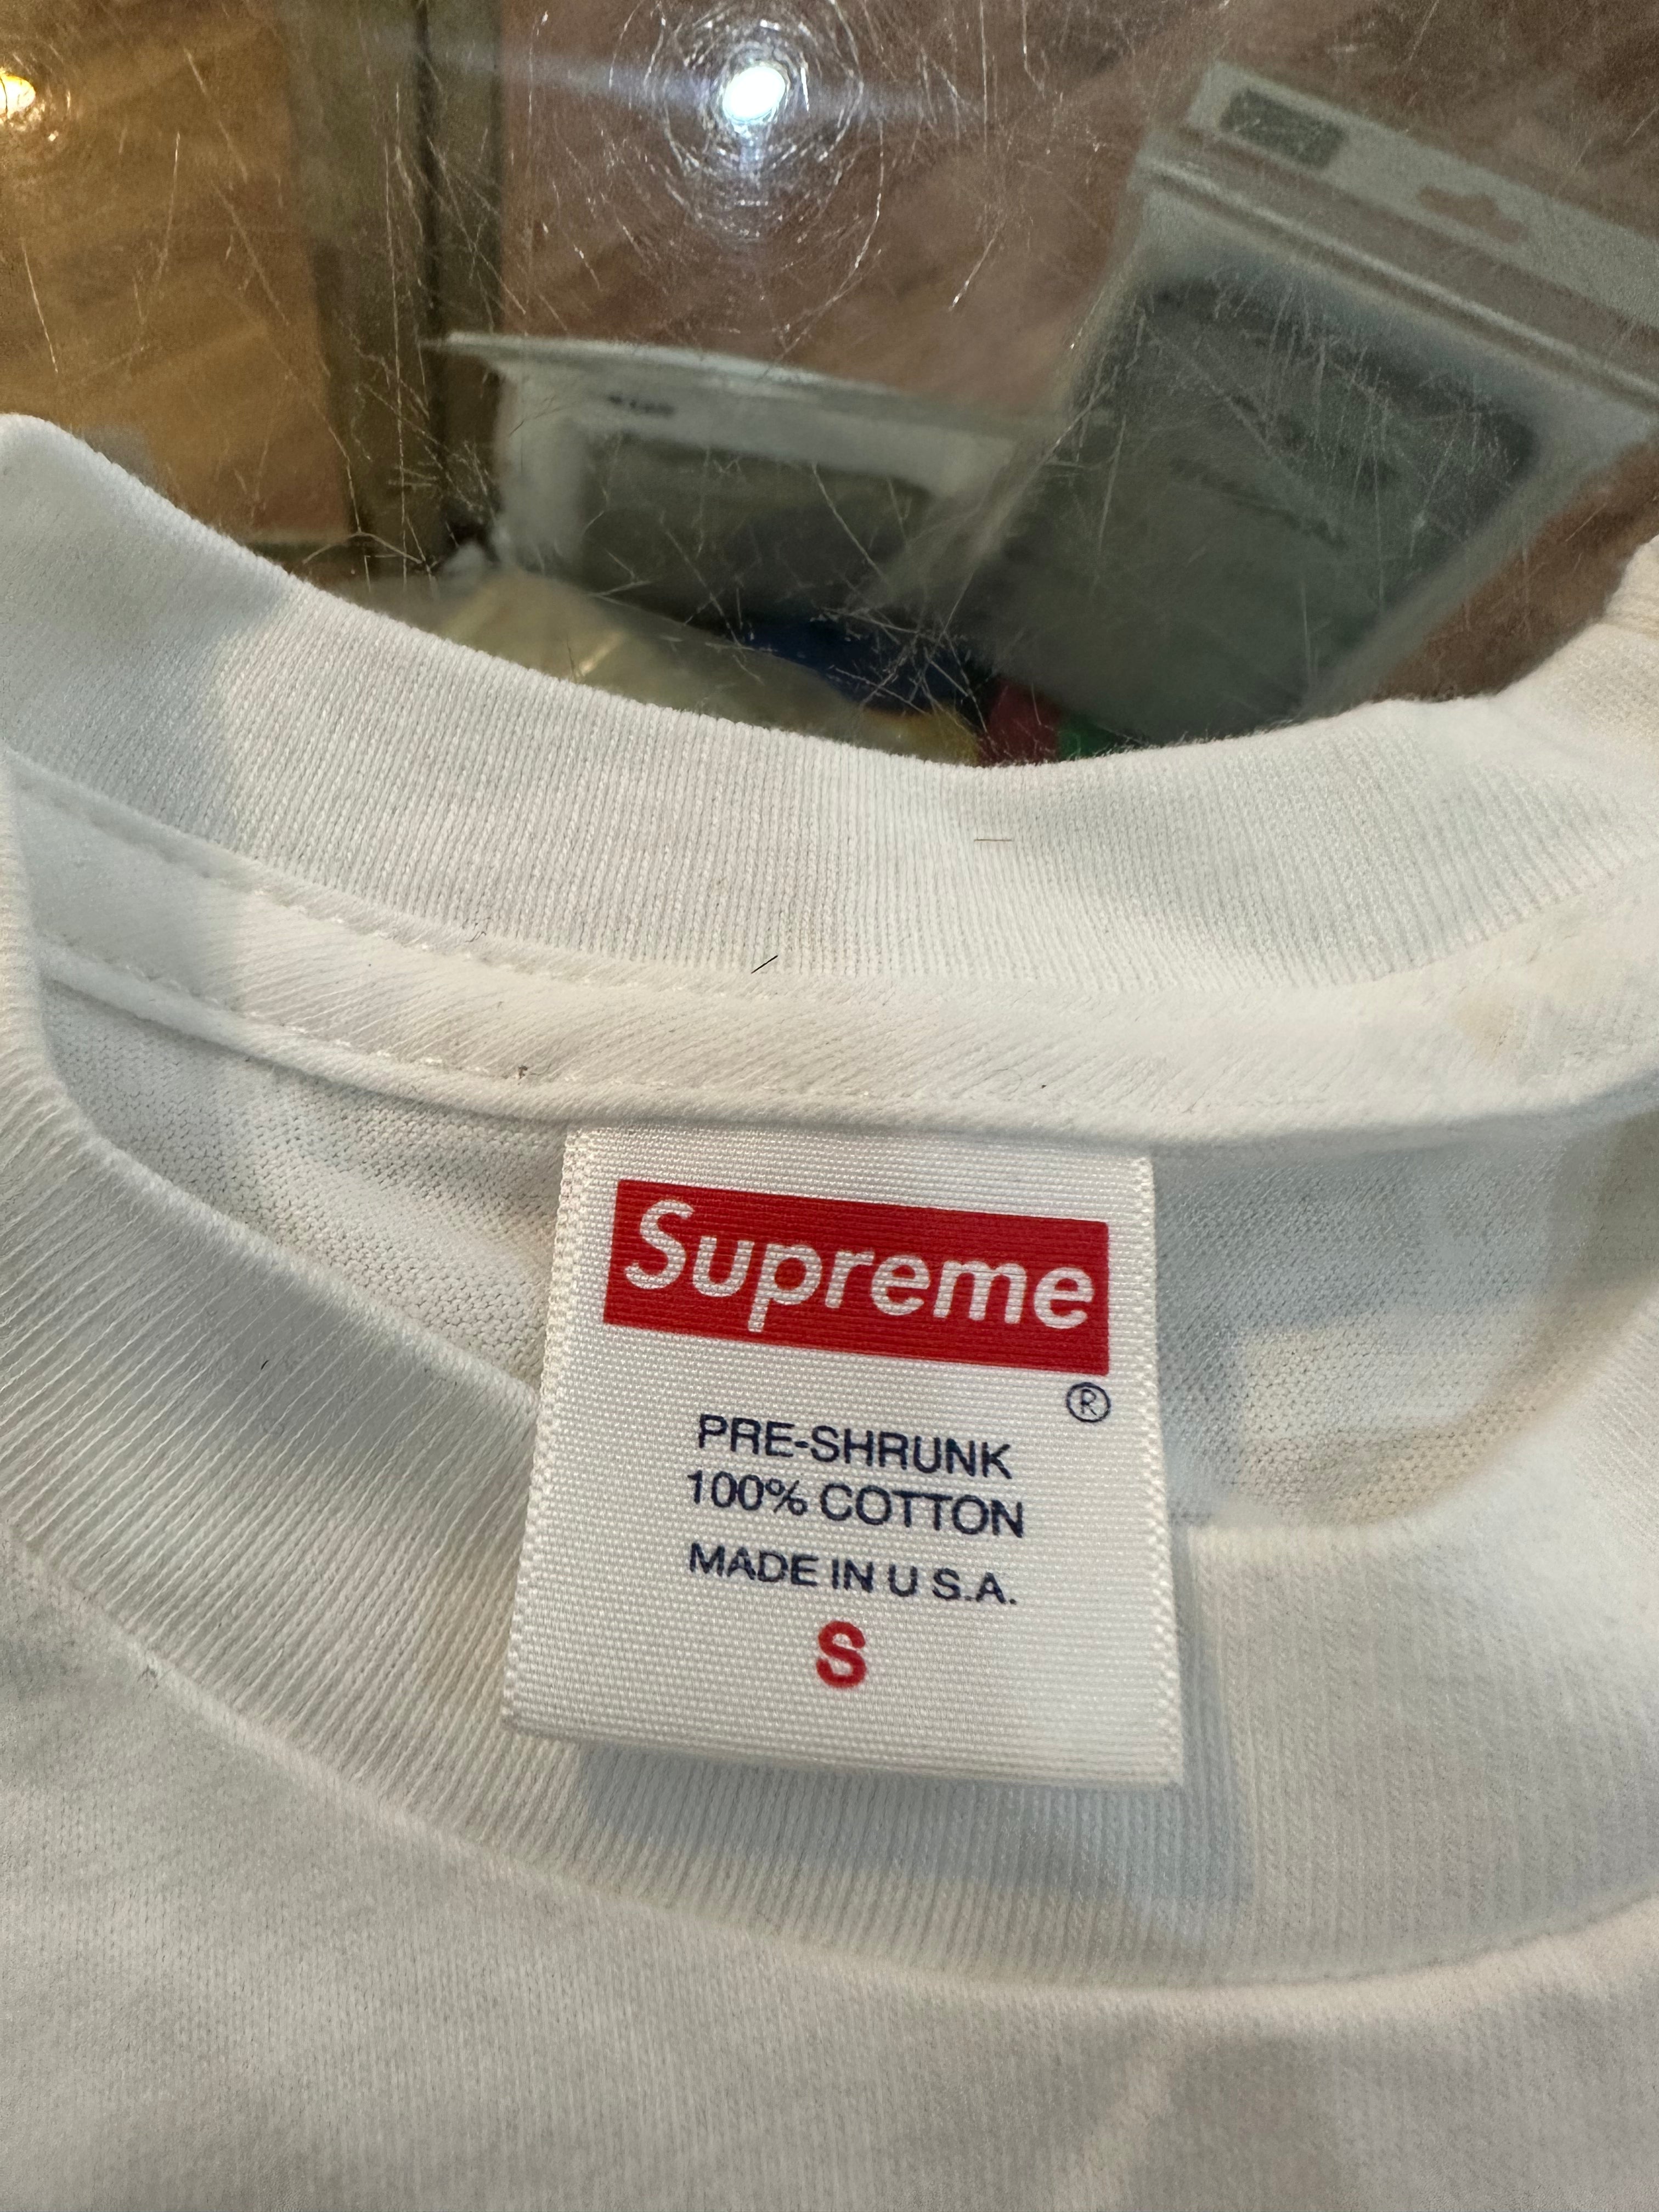 Brand new White Supreme Faces Long Sleeve Size Small